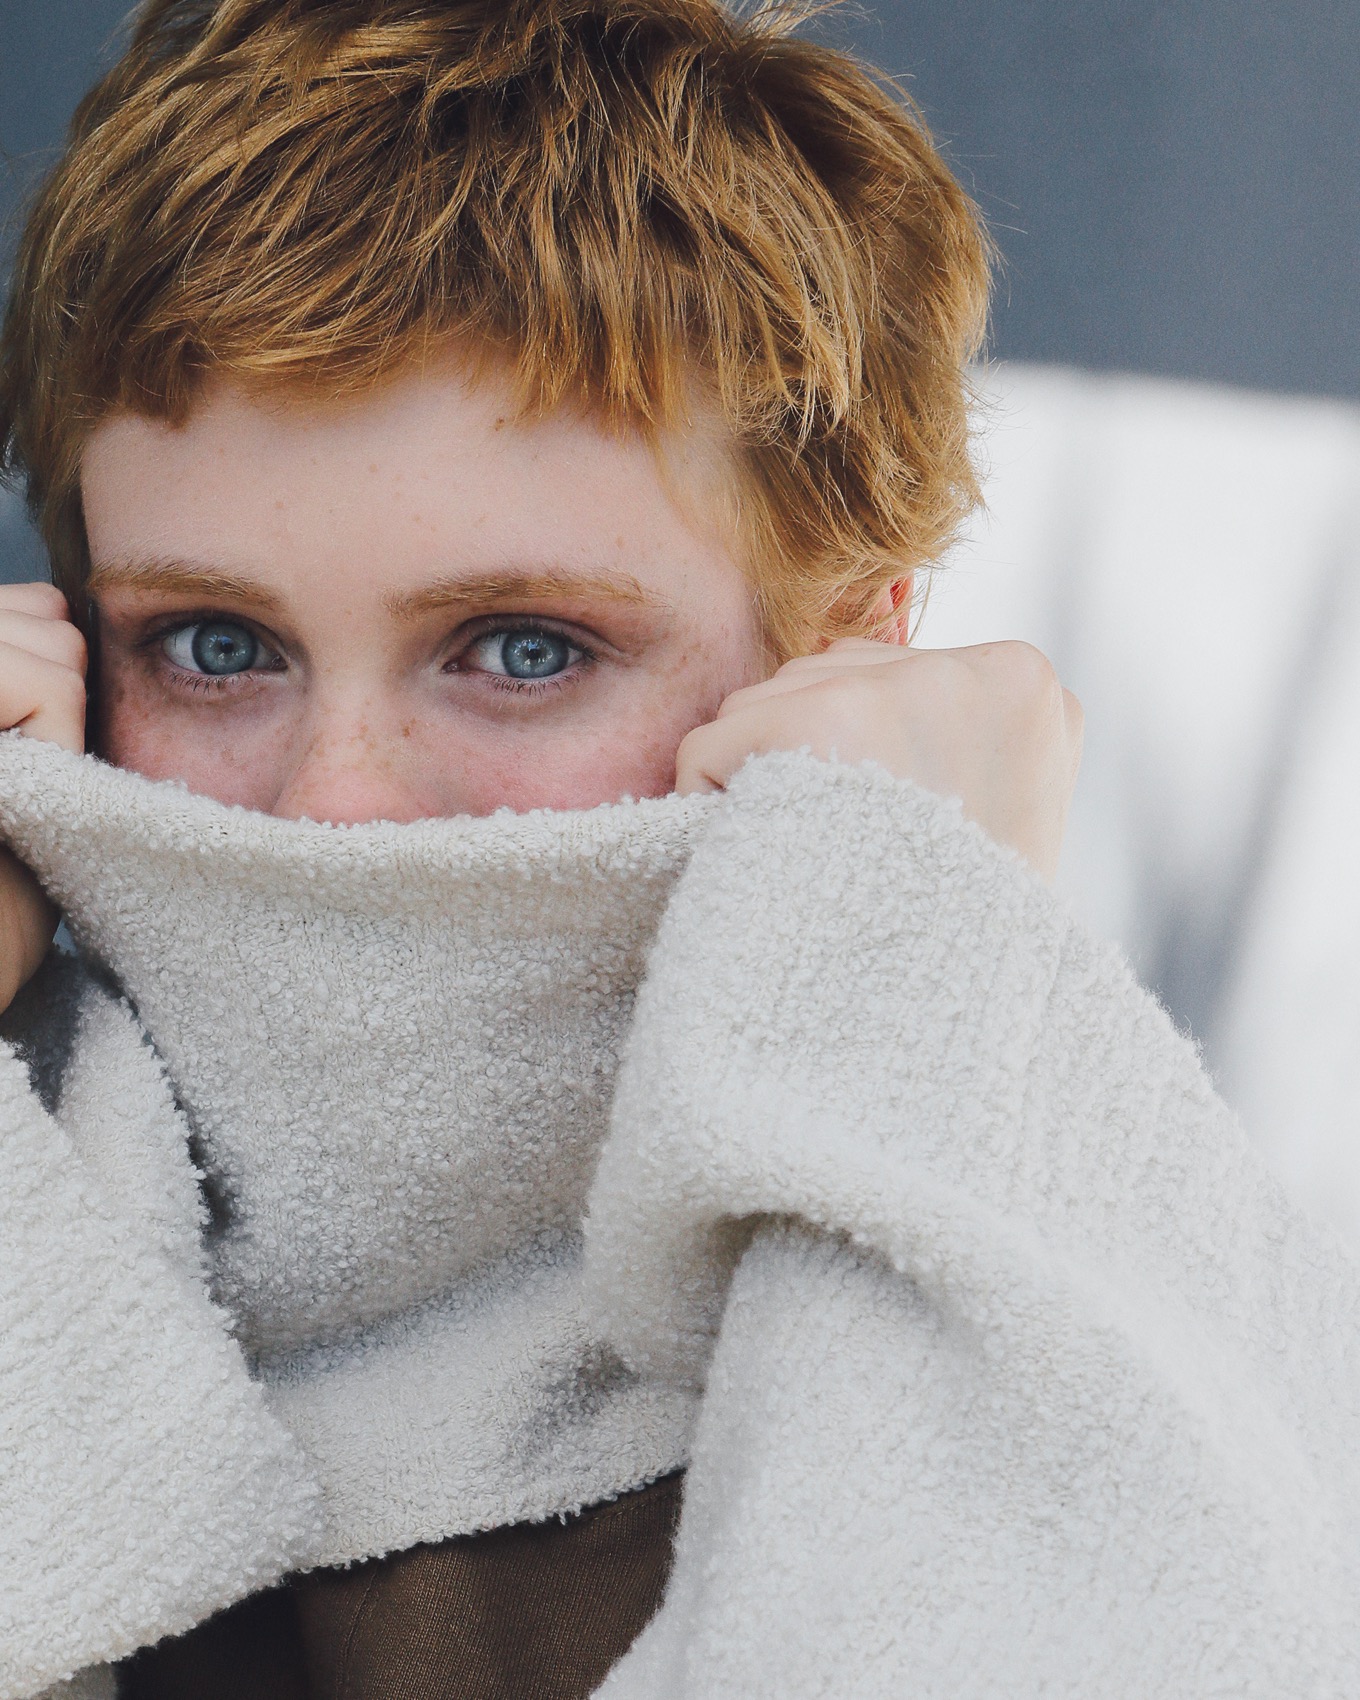 Sophia Lillis Actress Covering Face Sweater 1360x1700